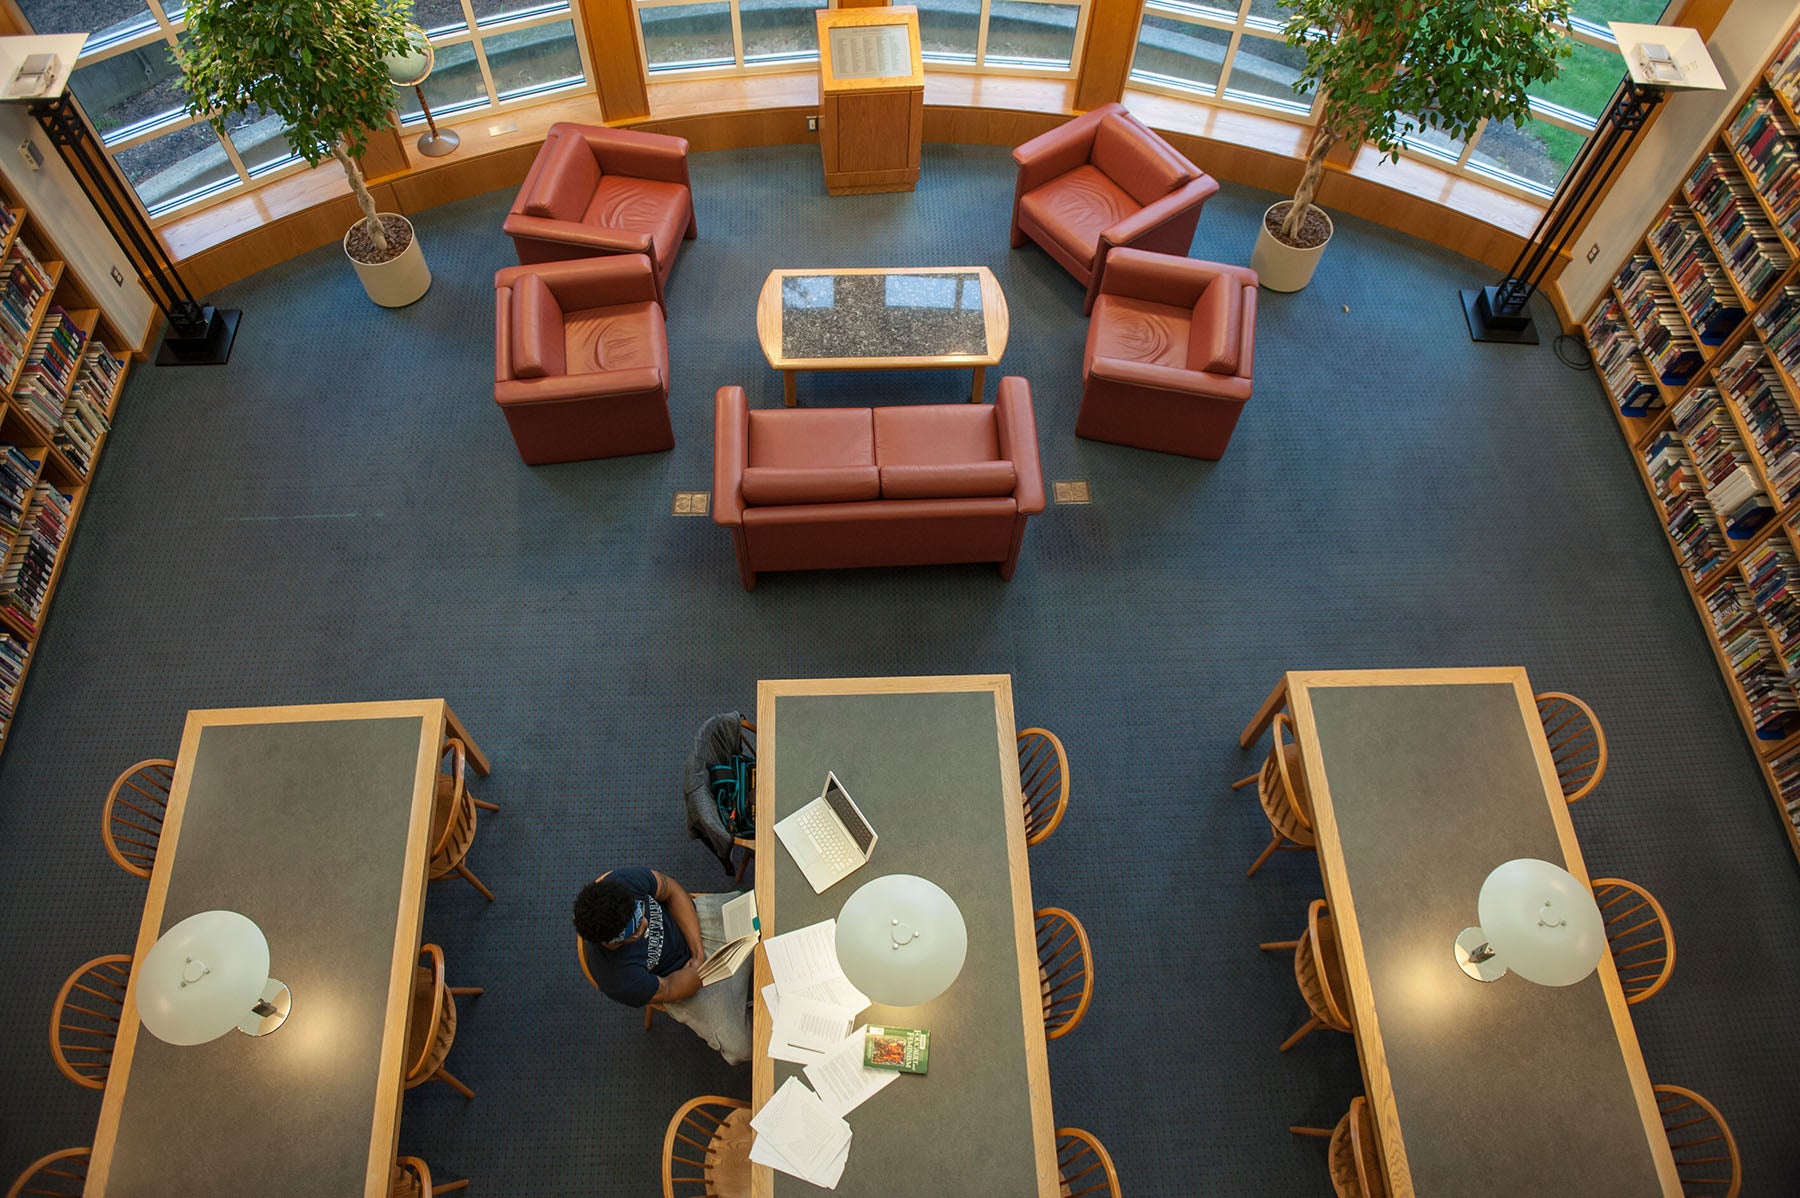 Interior shot of library study space